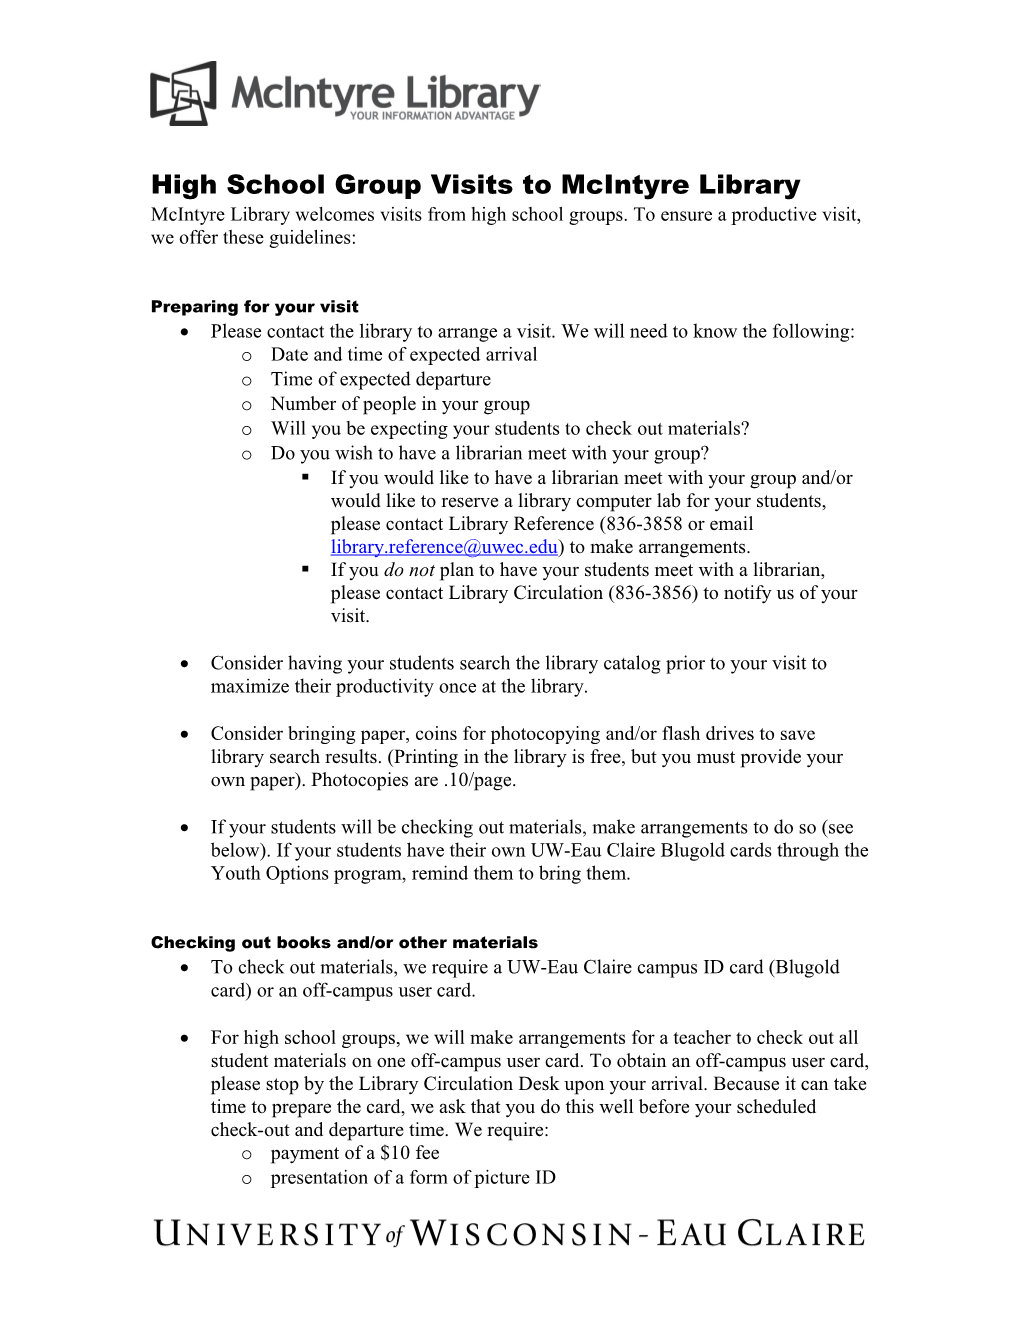 Mcintyre Library Welcomes Visits from High School Groups